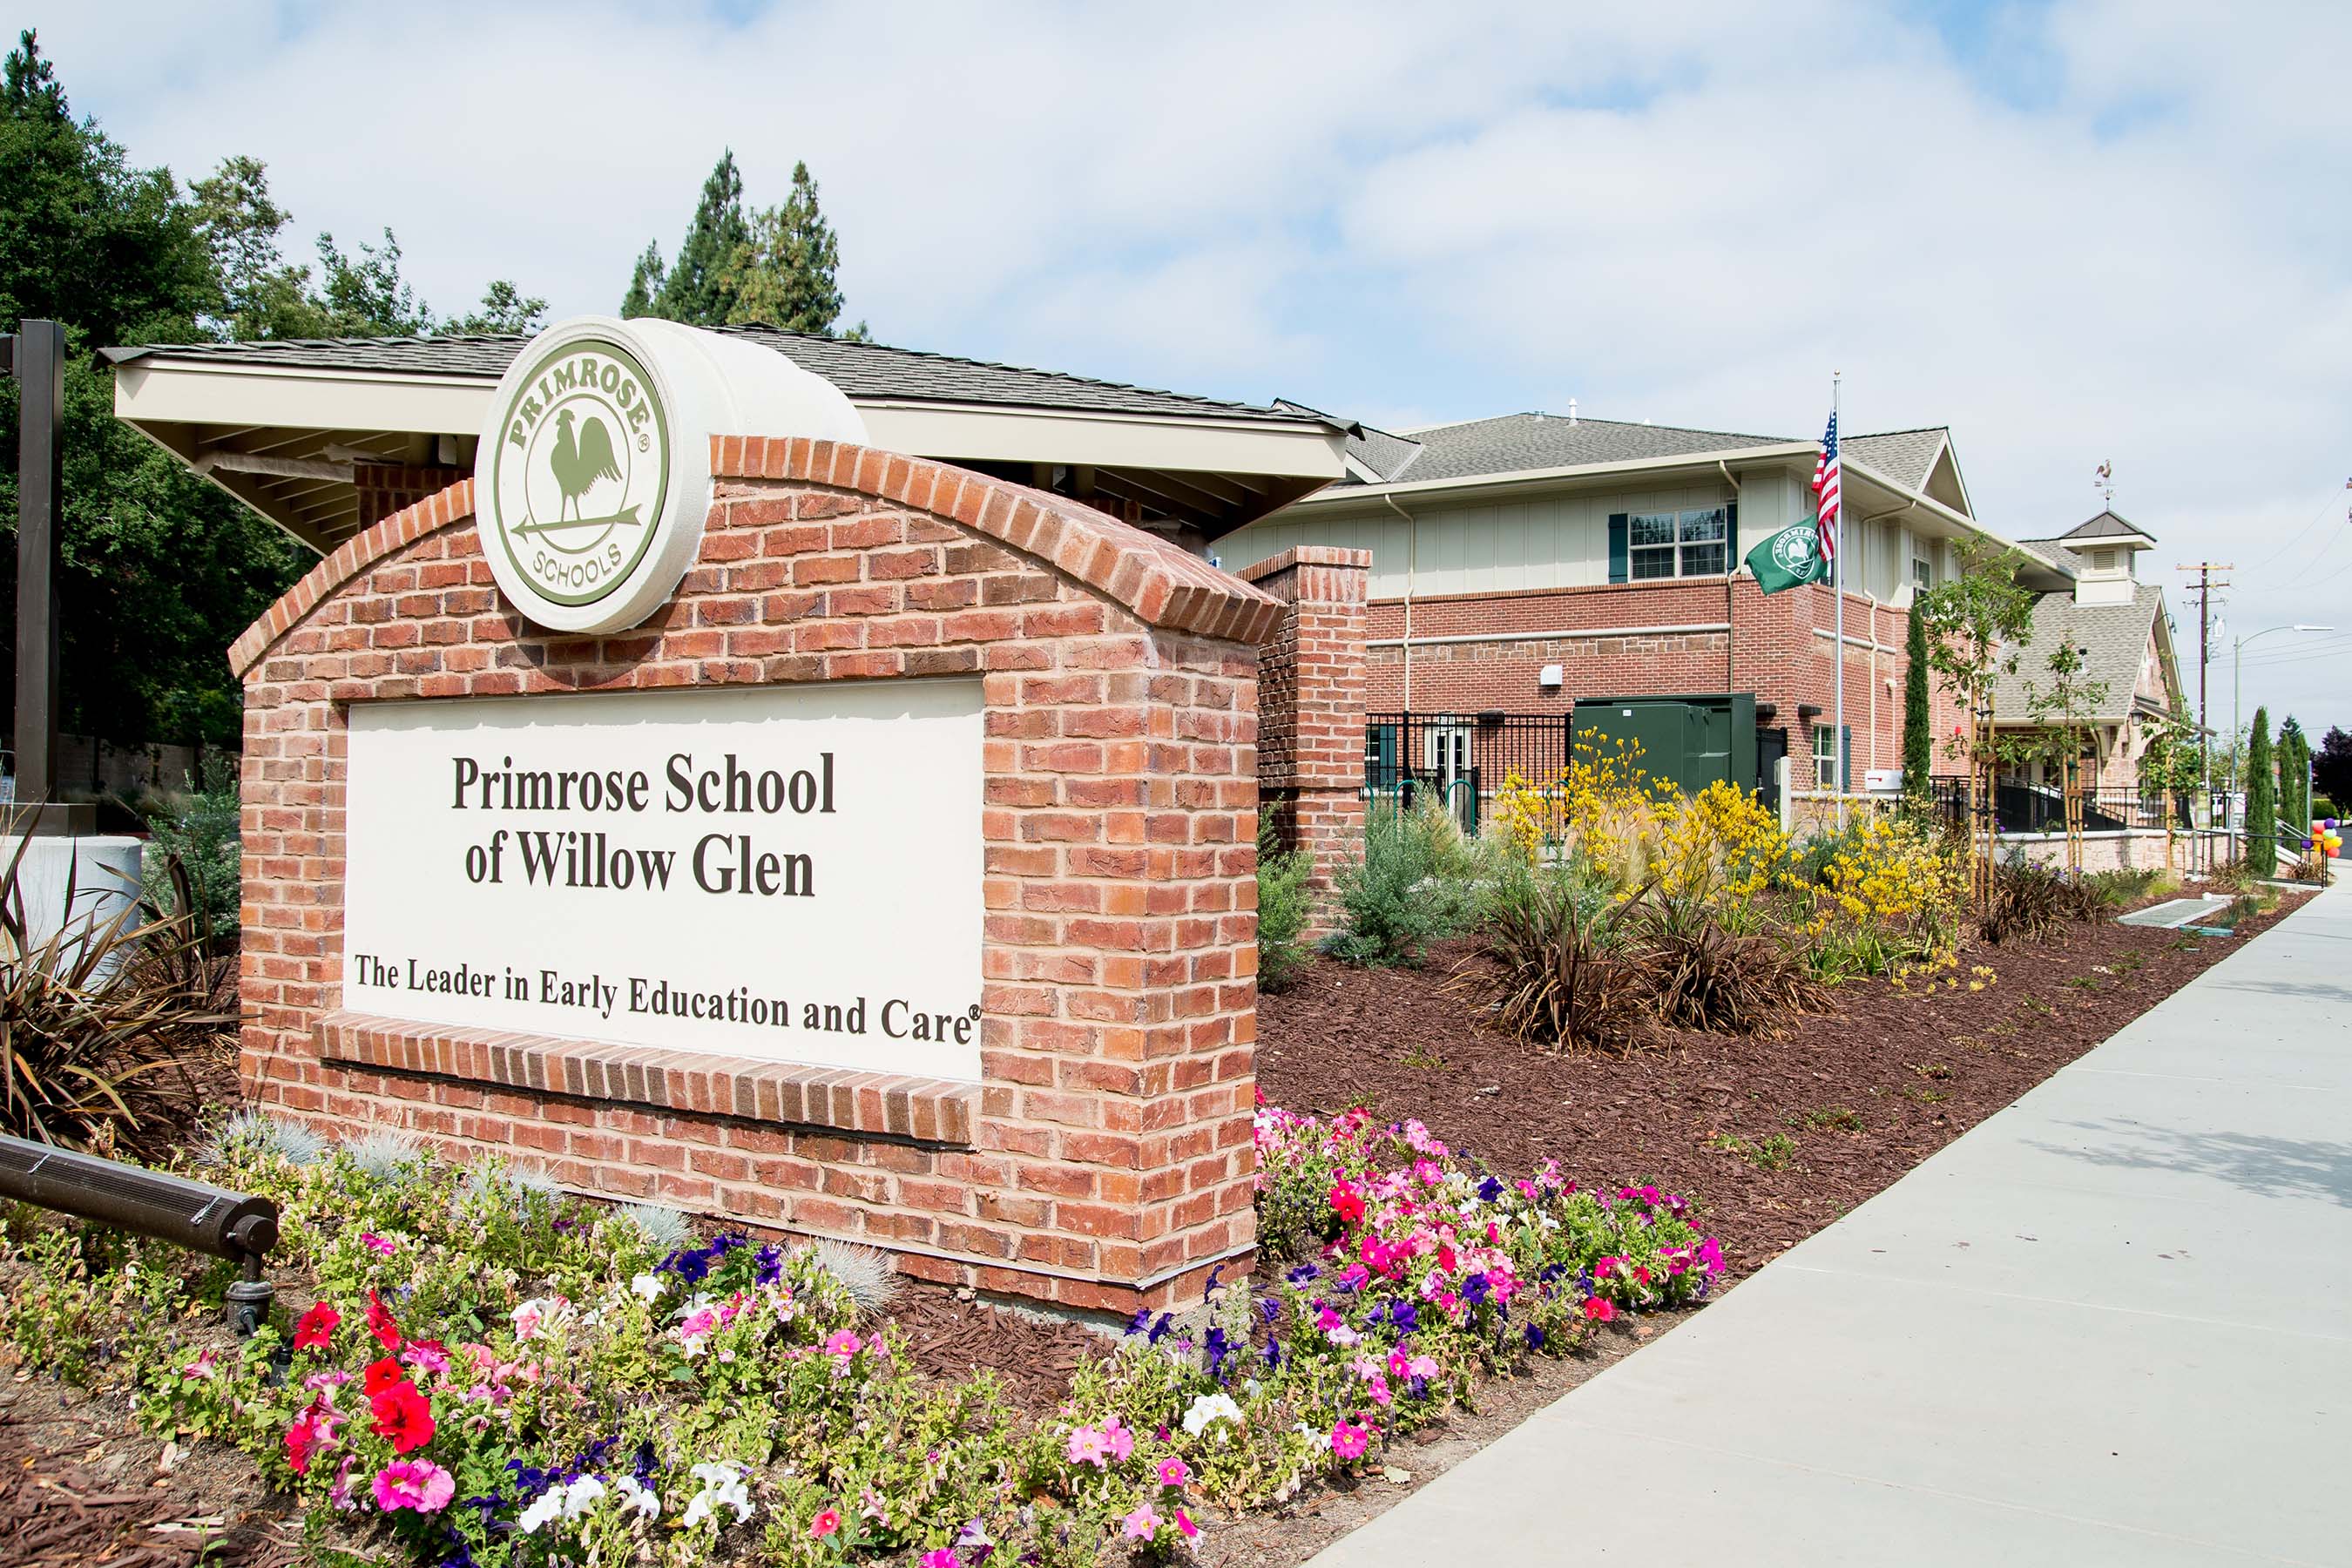 Primrose School of Willow Glen opened its doors in September 2017 and now serves more than 100 children and families in the San Jose area.